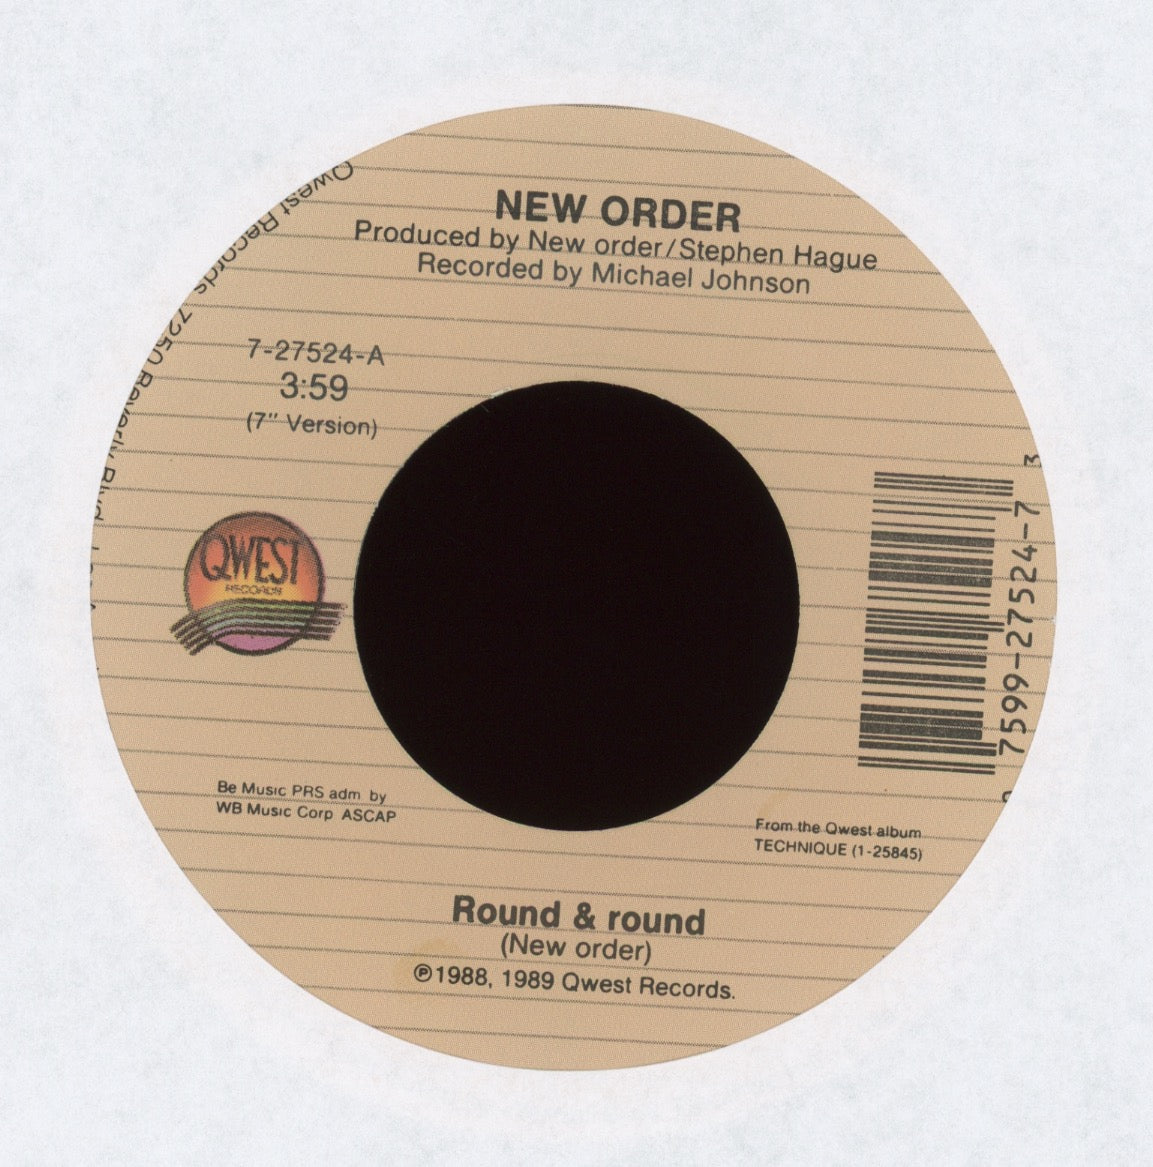 New Order - Round & round on Qwest With Picture Sleeve